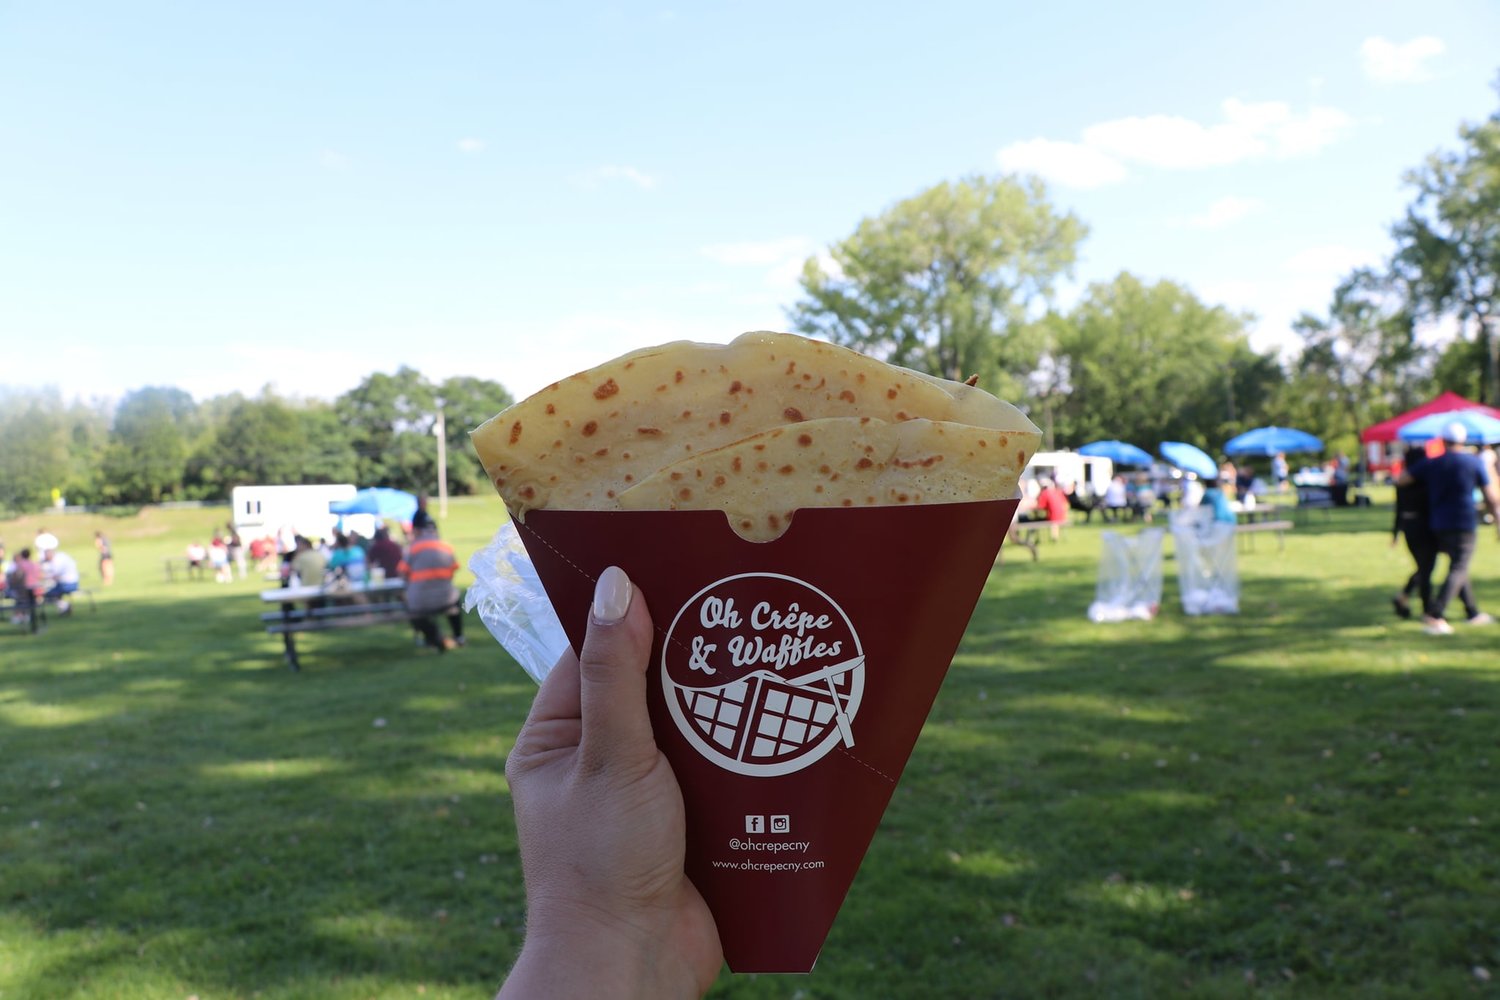 Oh Crepe & Waffles will be back at this year’s What the Truck? event in Utica.